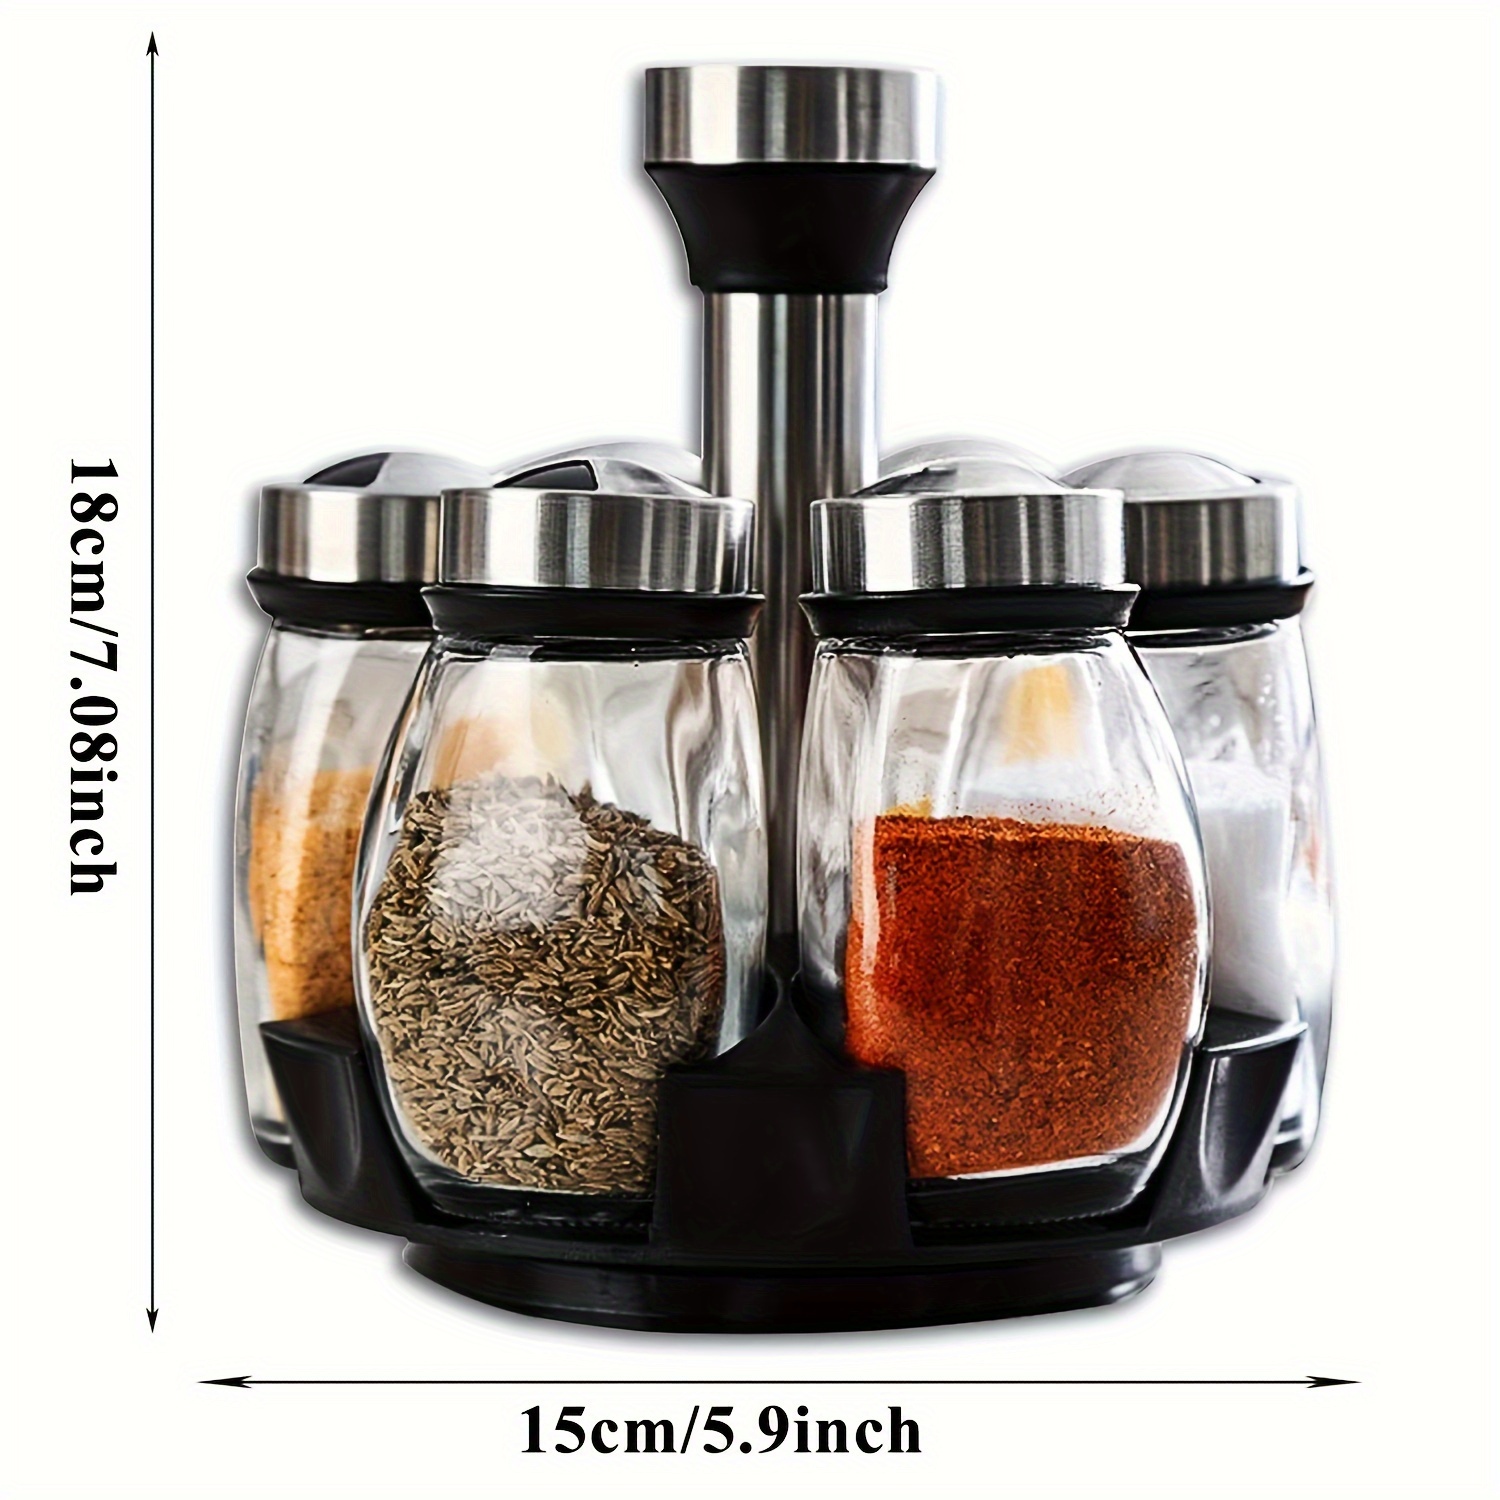 1 Set, Spices And Seasonings Sets, Countertop Spice Rack With 12 Jars,  Spice Organizer For Countertop Or Cabinet, Multifunctional Seasoning  Organizer